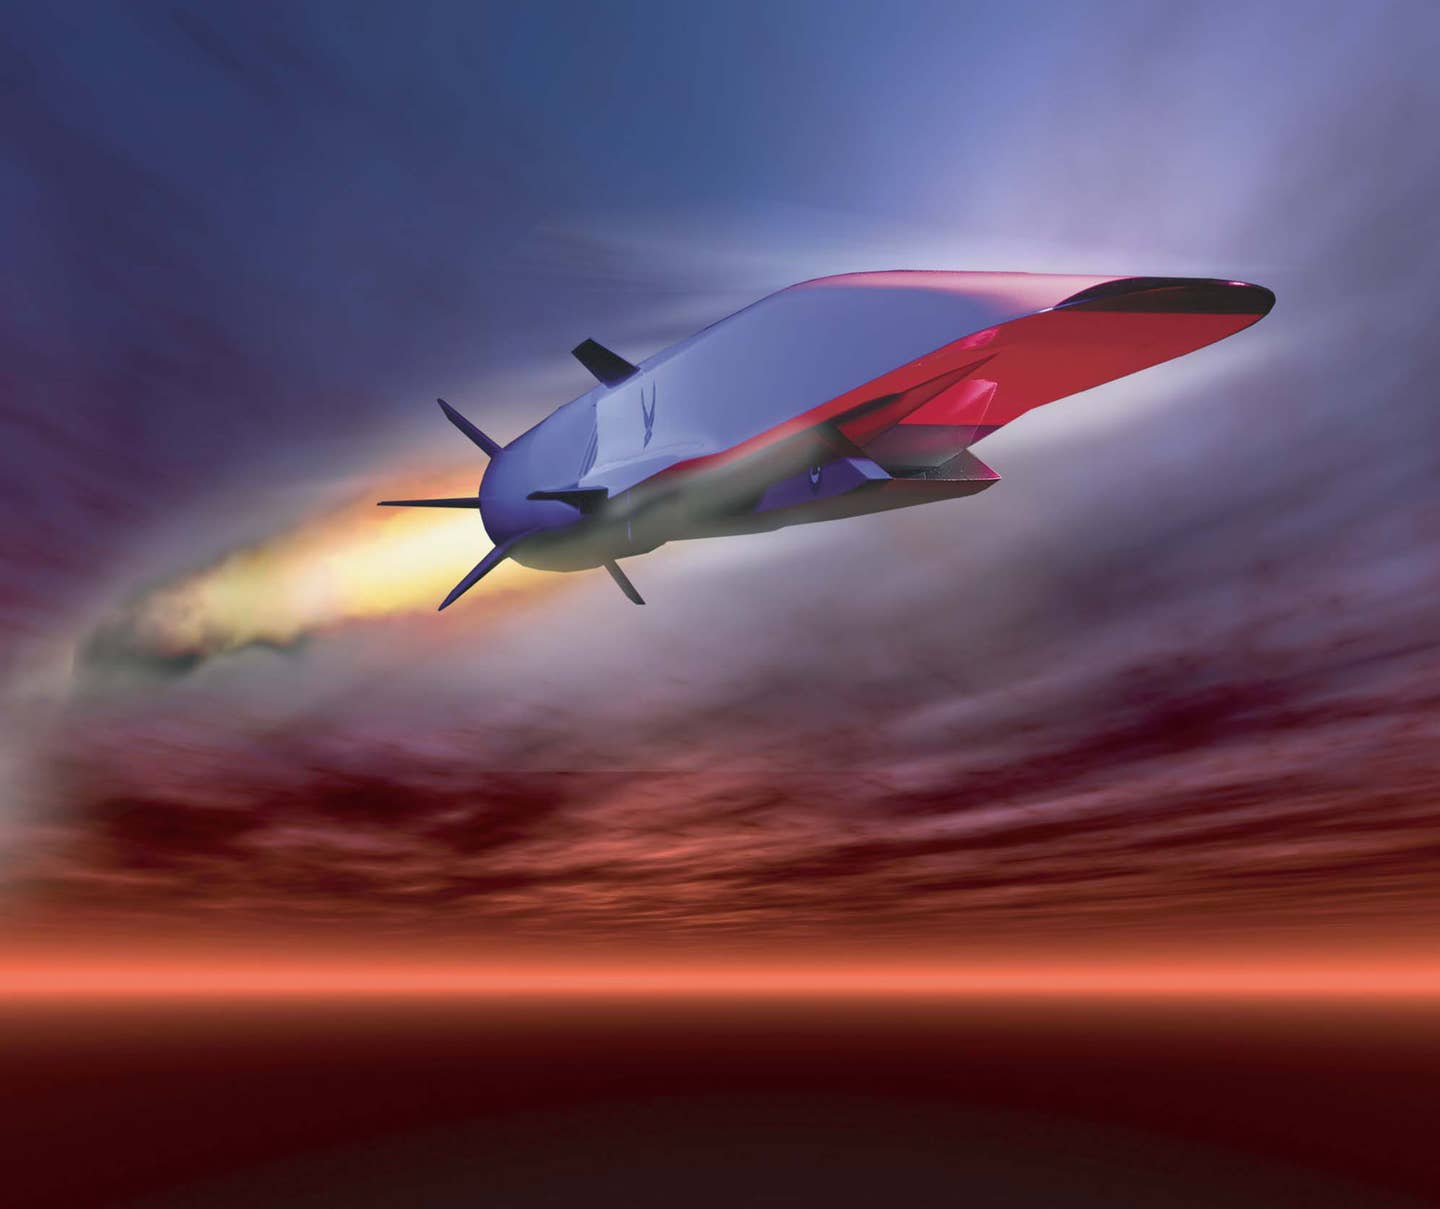 DARPA researchers see future wars won with hypersonics and artificial intelligence